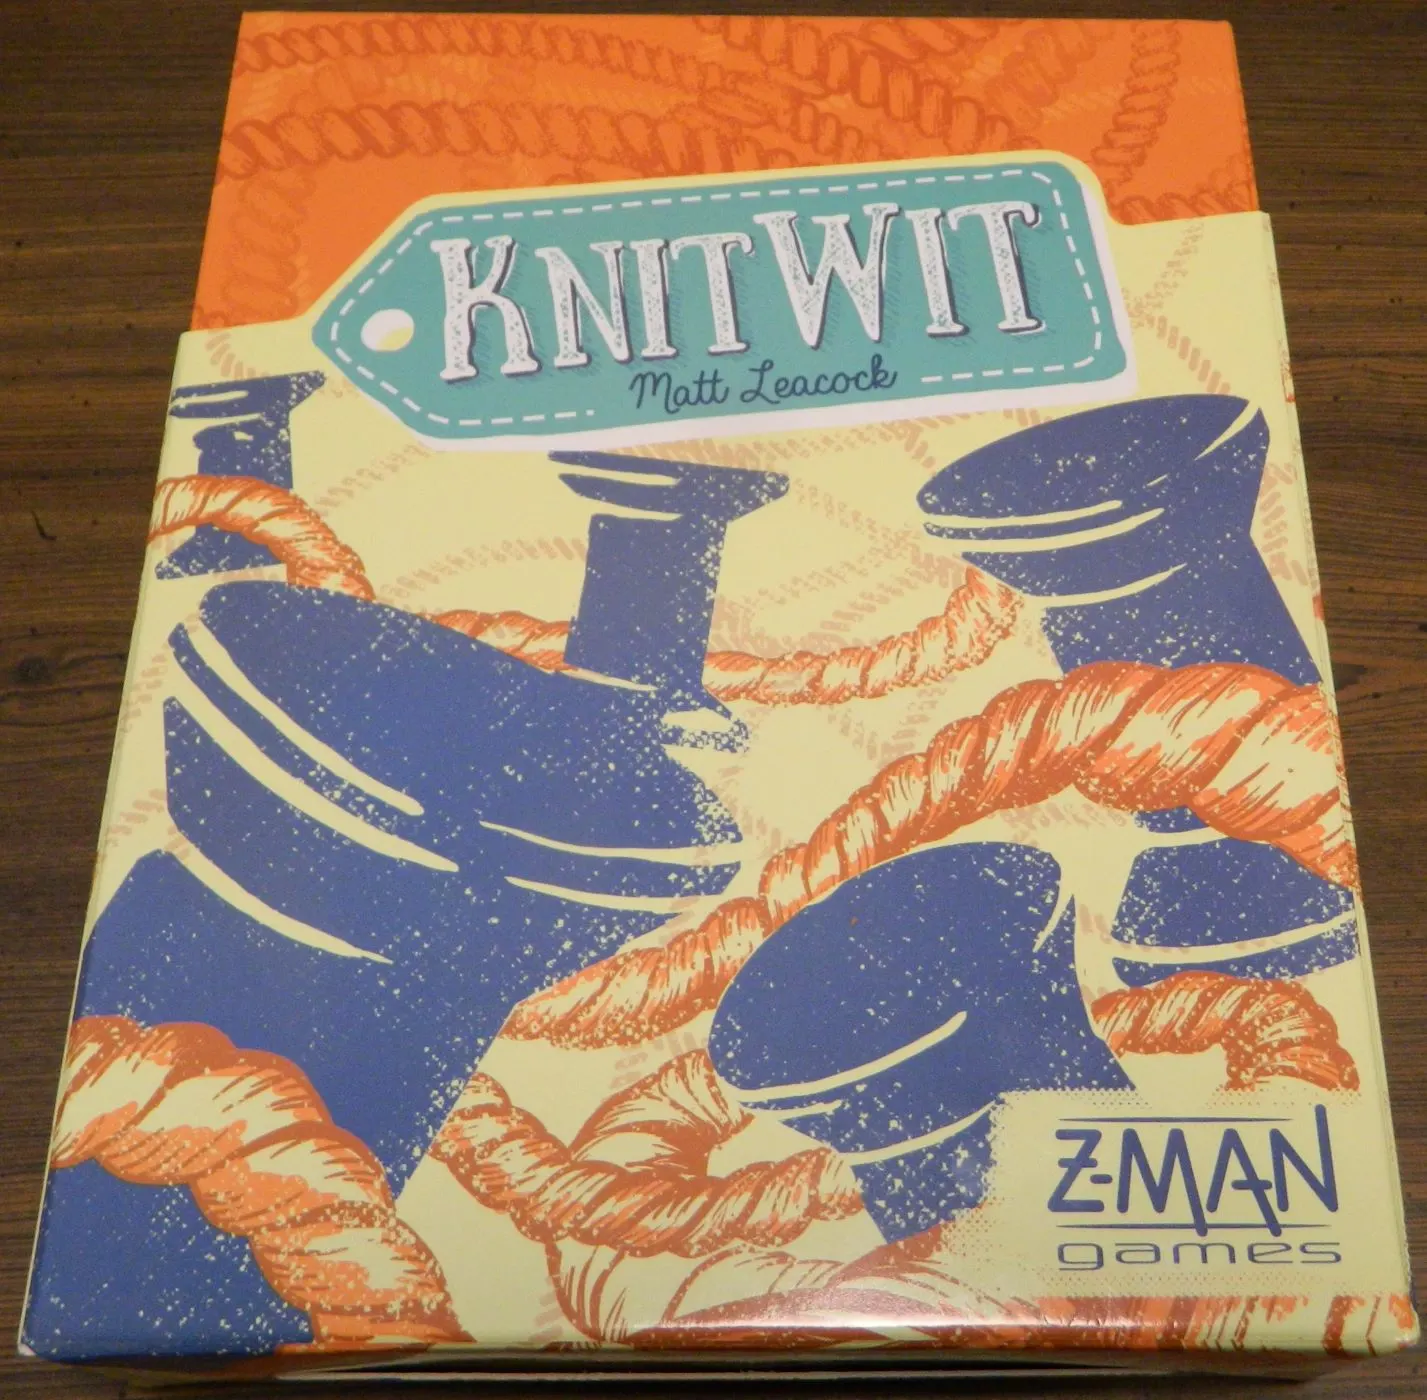 Box for Knit Wit